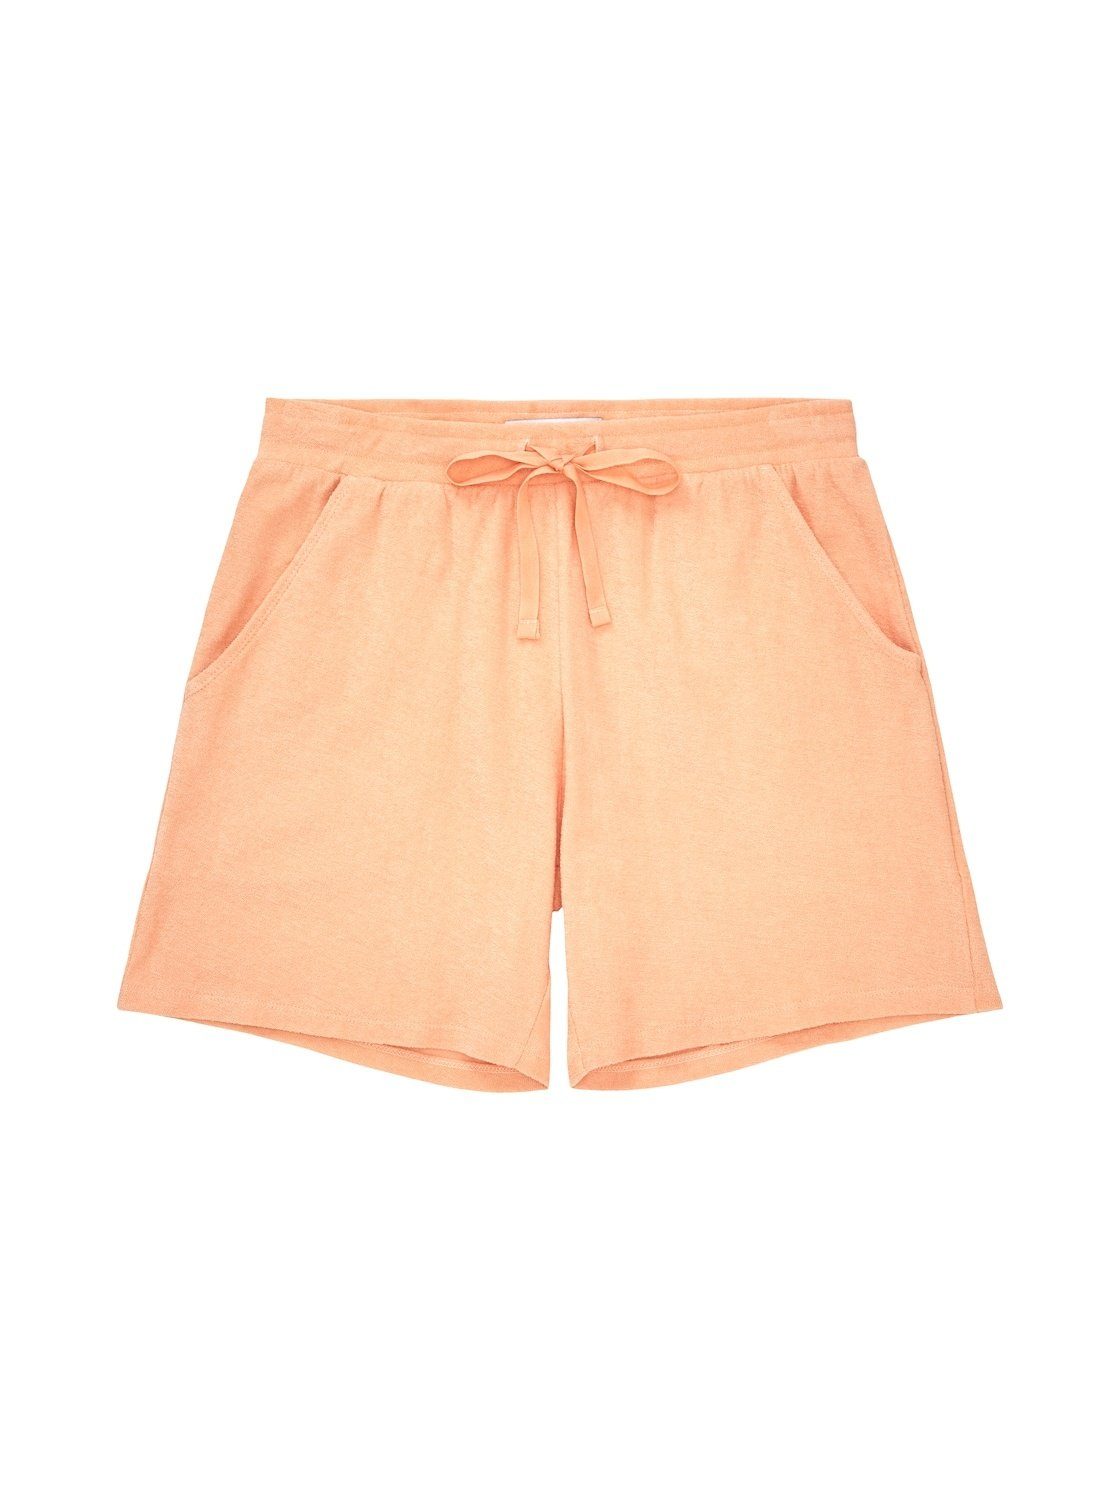 TOM TAILOR Schlafshorts Shorts Frottee